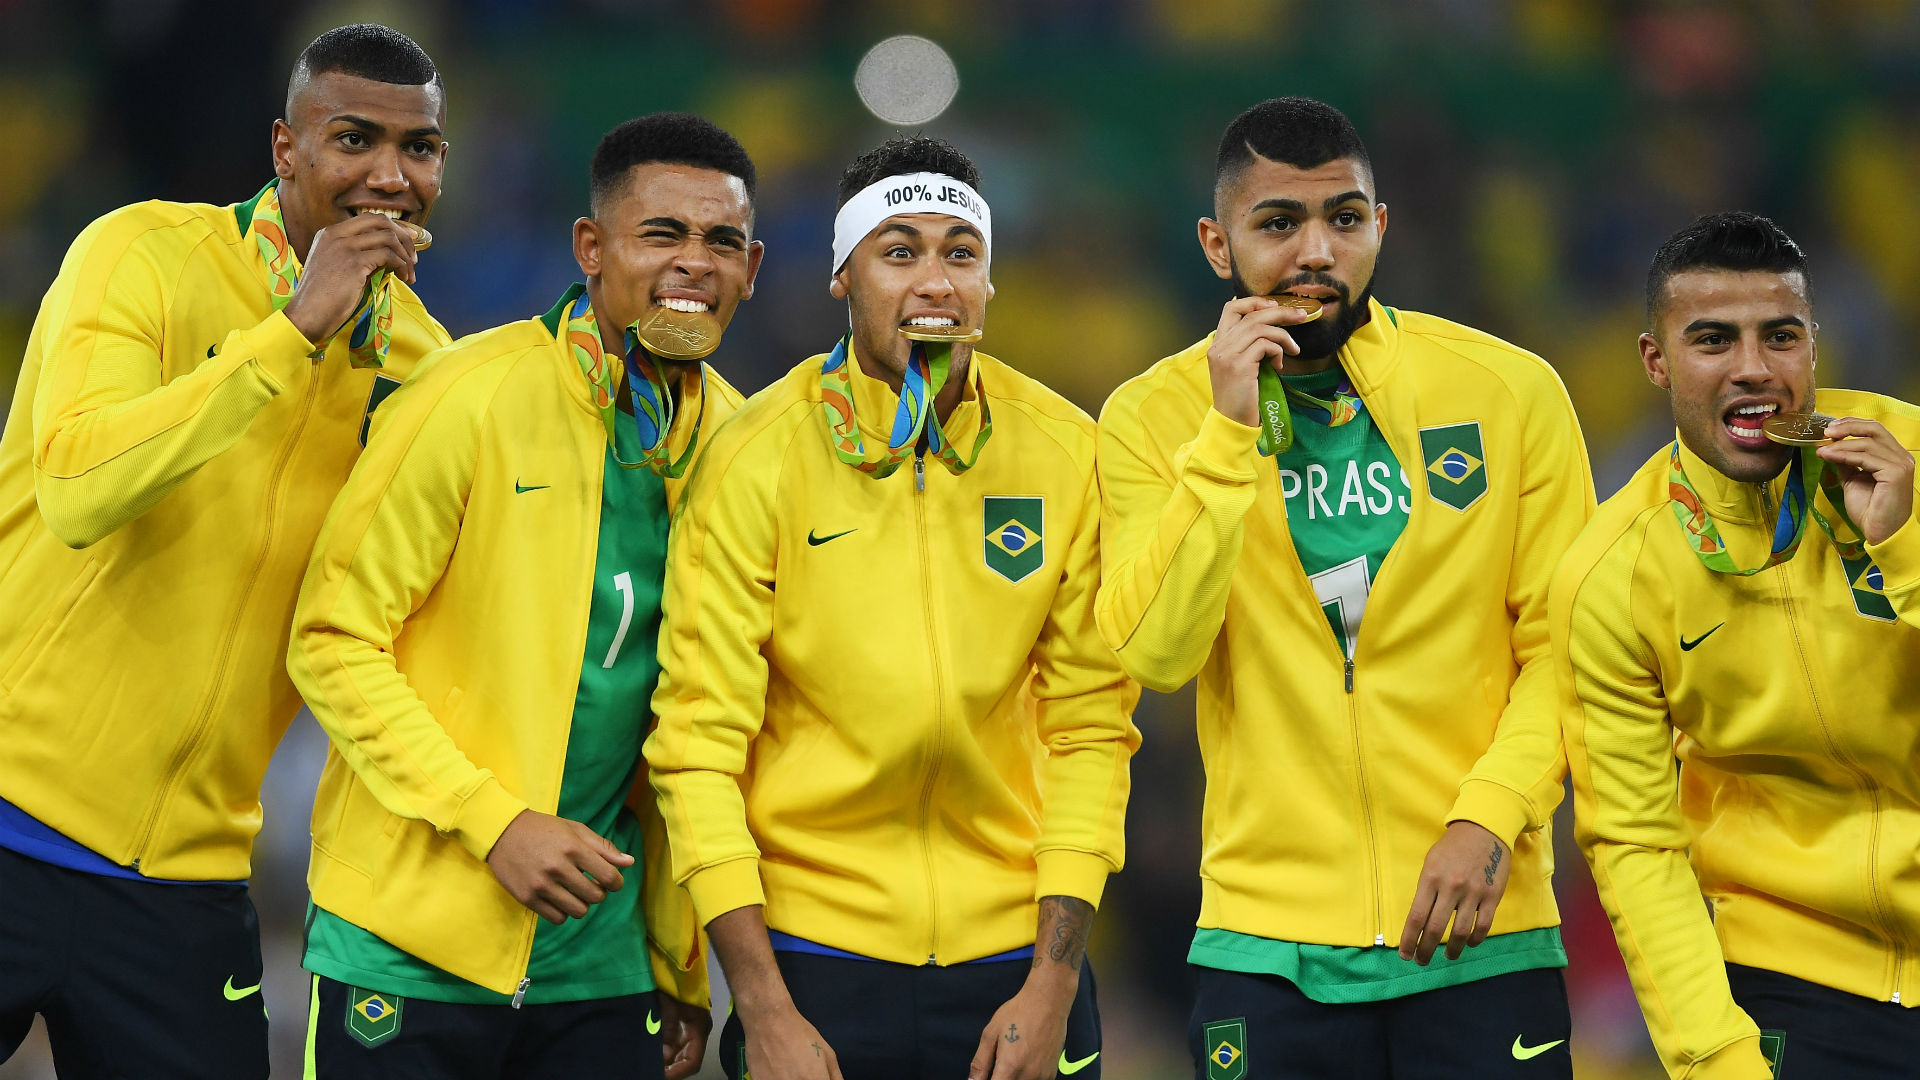 Romario, Tevez and Neymar – Who are the top goalscorers in Olympic men’s football?